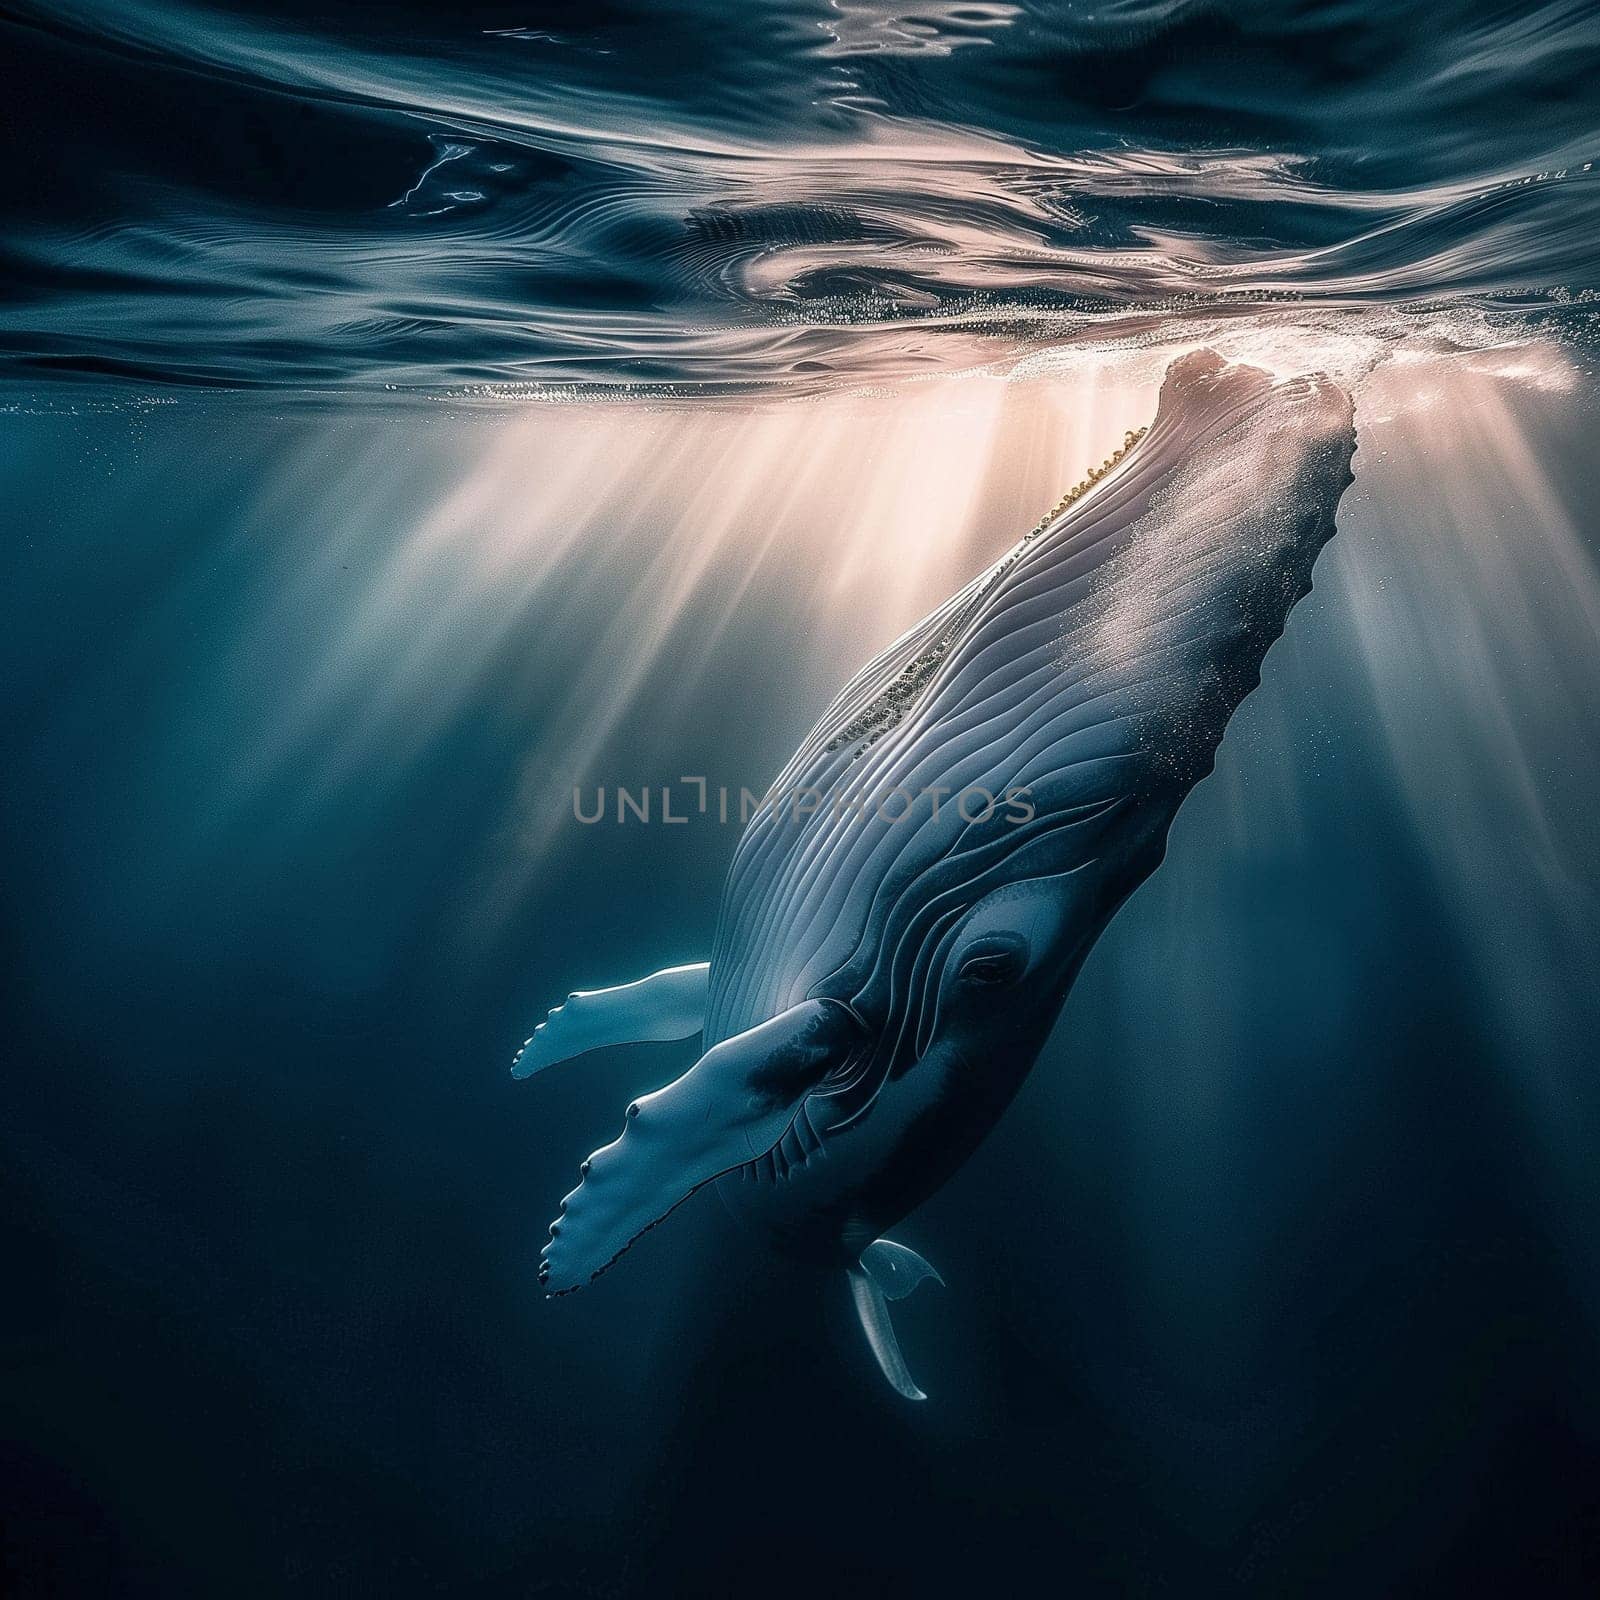 A stunningly beautiful whale in the ocean at sunset by NeuroSky